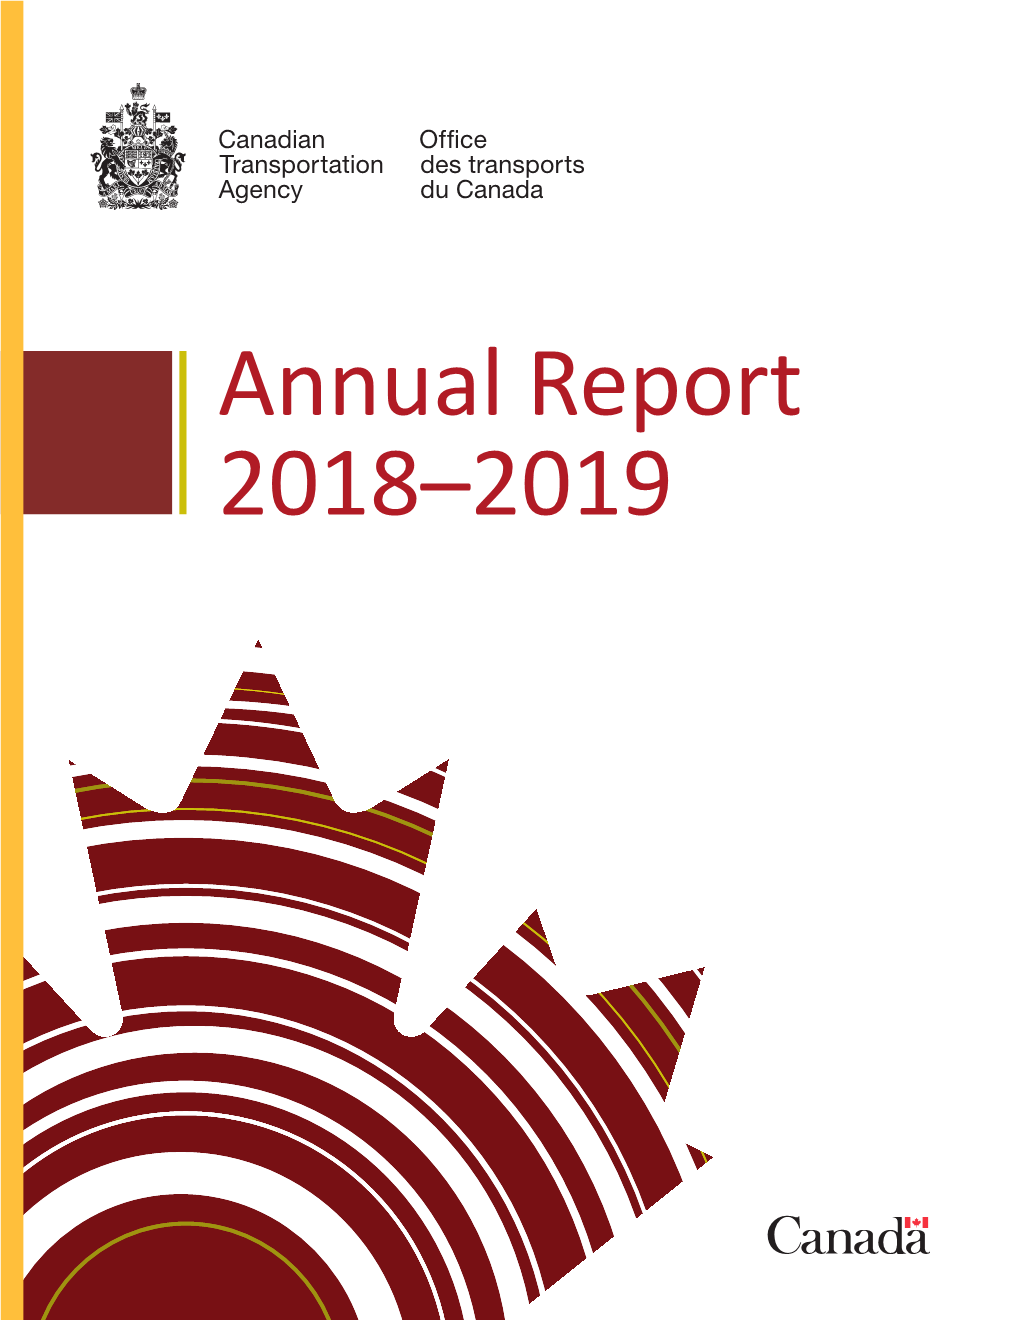 Canadian Transportation Agency Annual Report 2018-2019